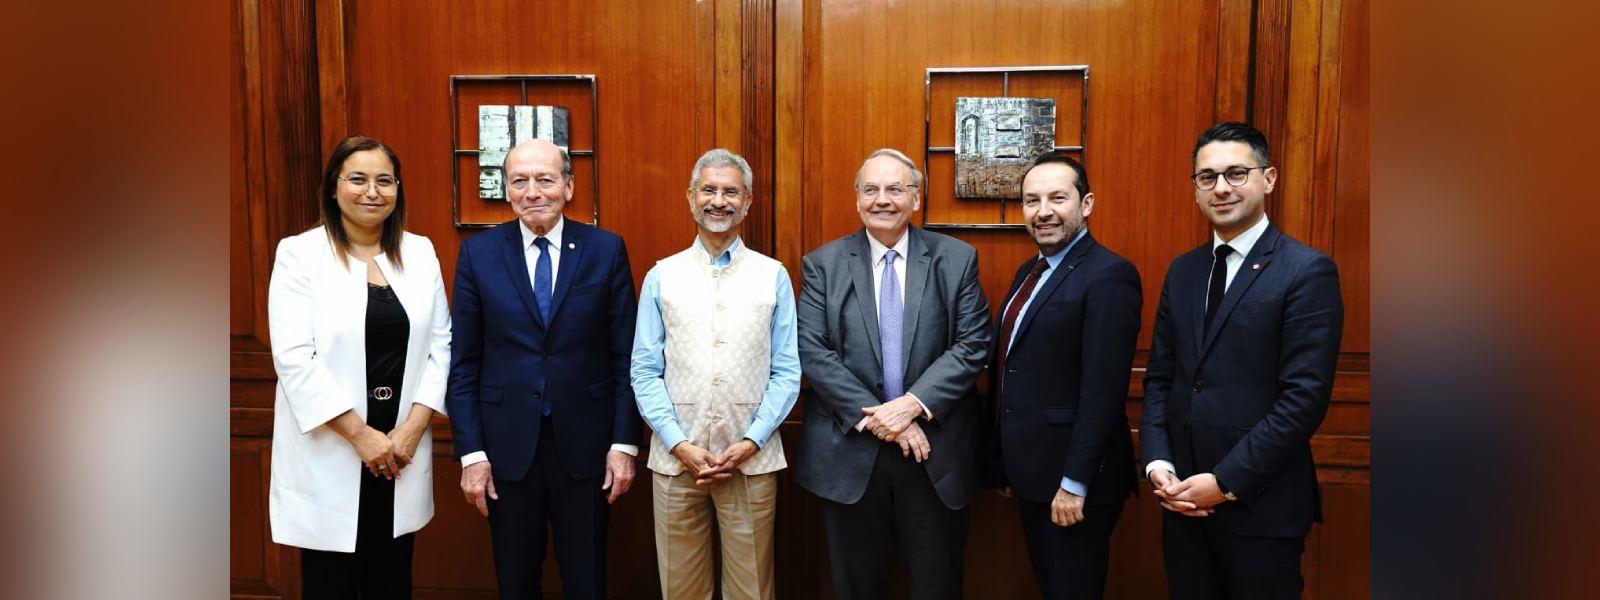 External Affairs Minister, Dr. S. Jaishankar met a delegation from Foreign Affairs Committee of the French National Assembly in New Delhi